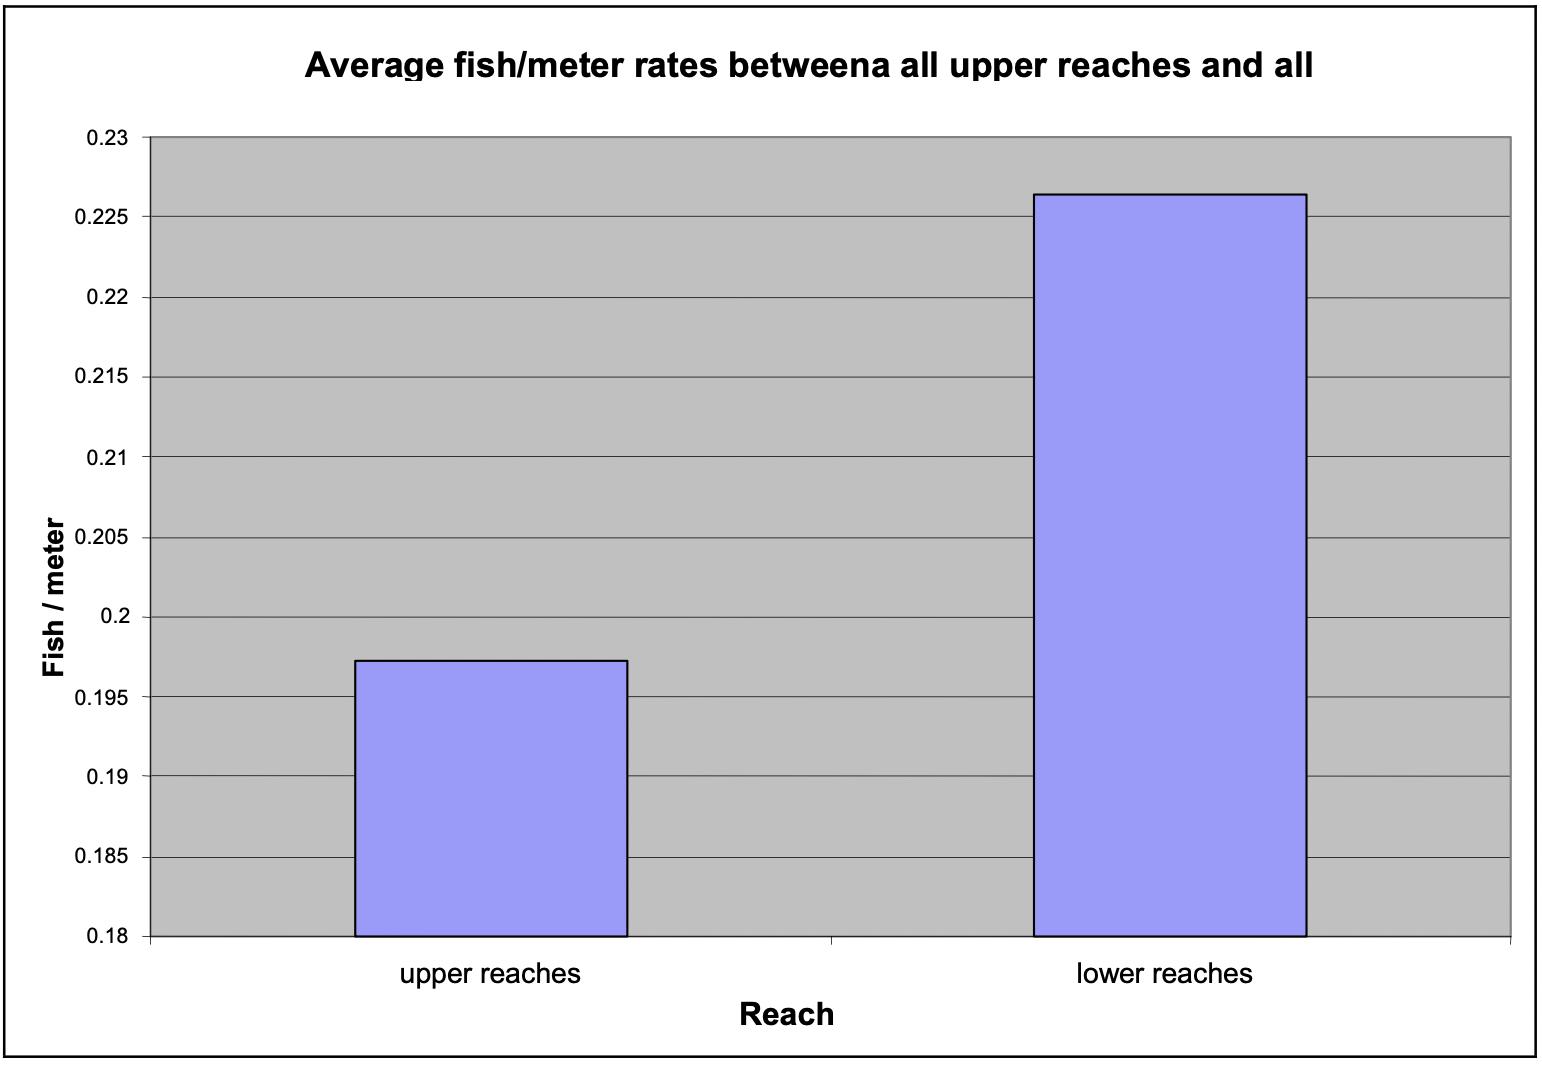 Figure 9. Average fish/meter of upper versus lower reaches of tributaries to the Skeena River, B.C. sampled between August 2nd and August 13th 2004.